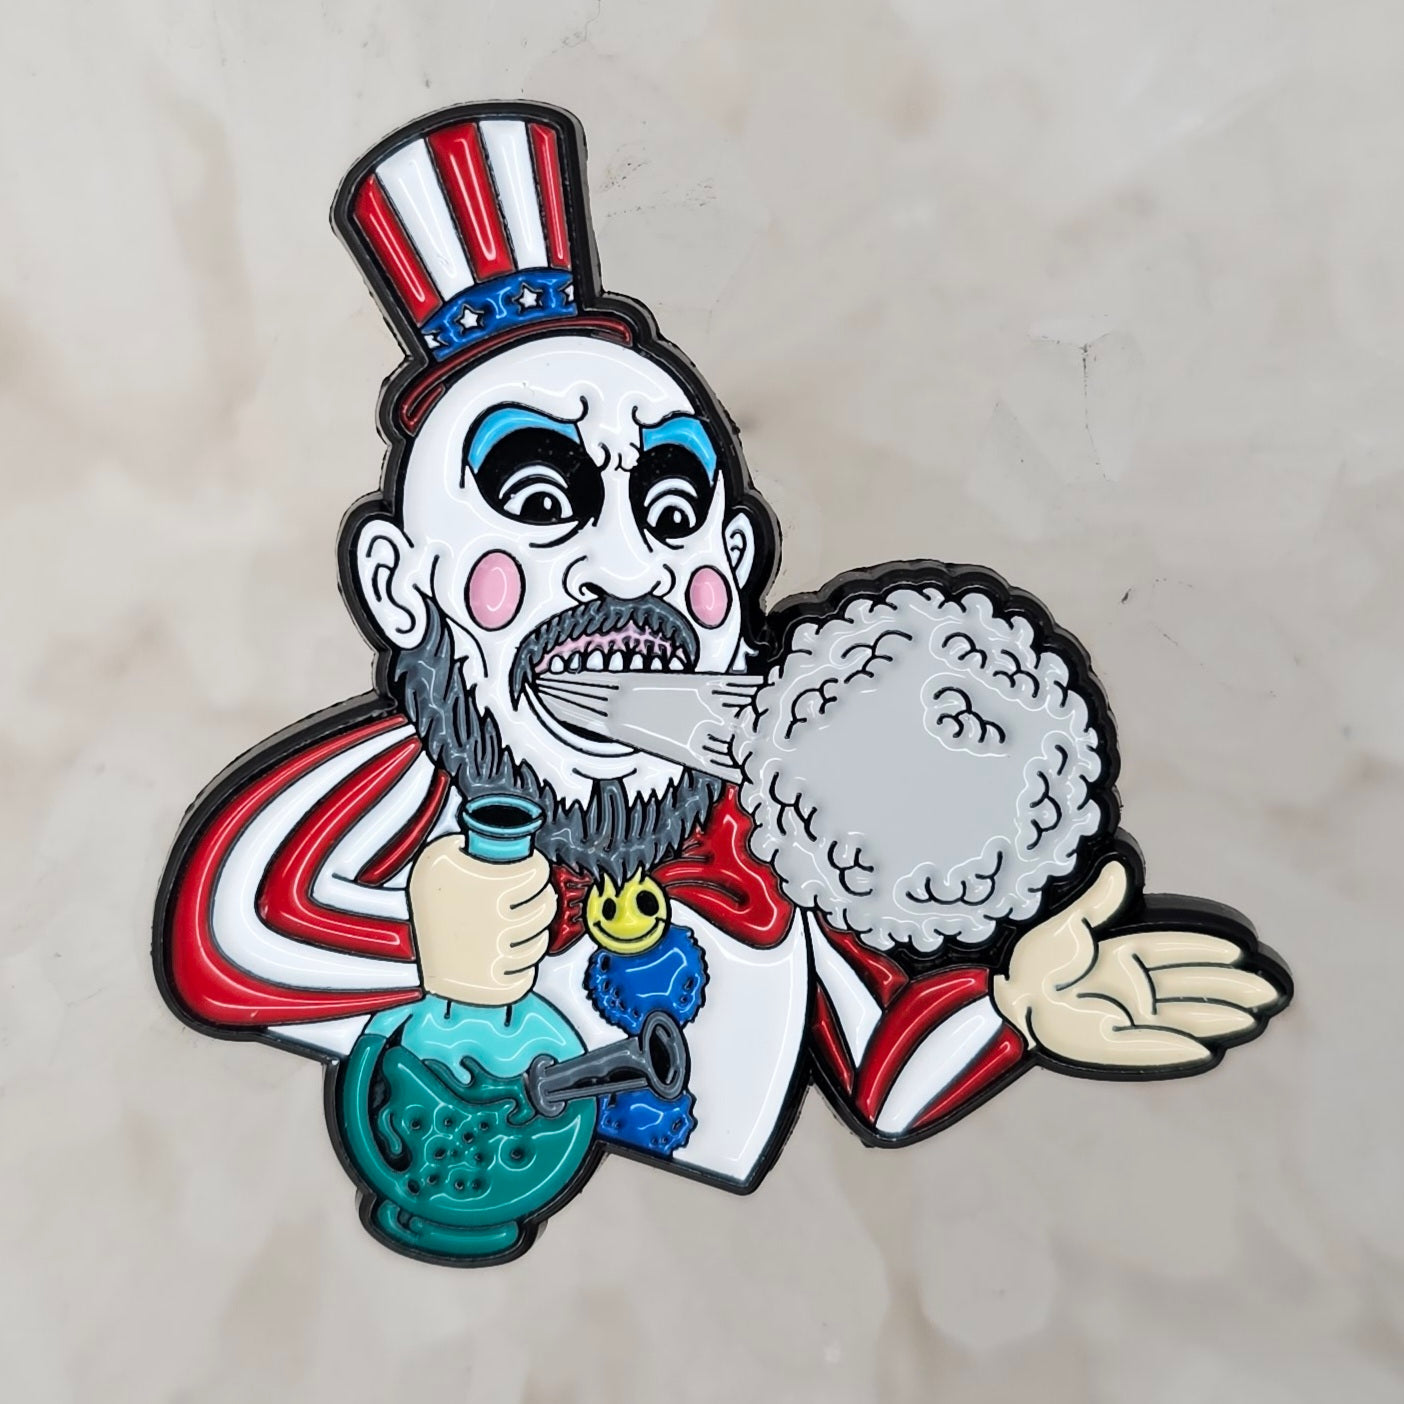 House Of 1000 Stoners Clown Weed Parody Captain Spalding Horror Enamel Pins Hat Pins Lapel Pin Brooch Badge Festival Pin